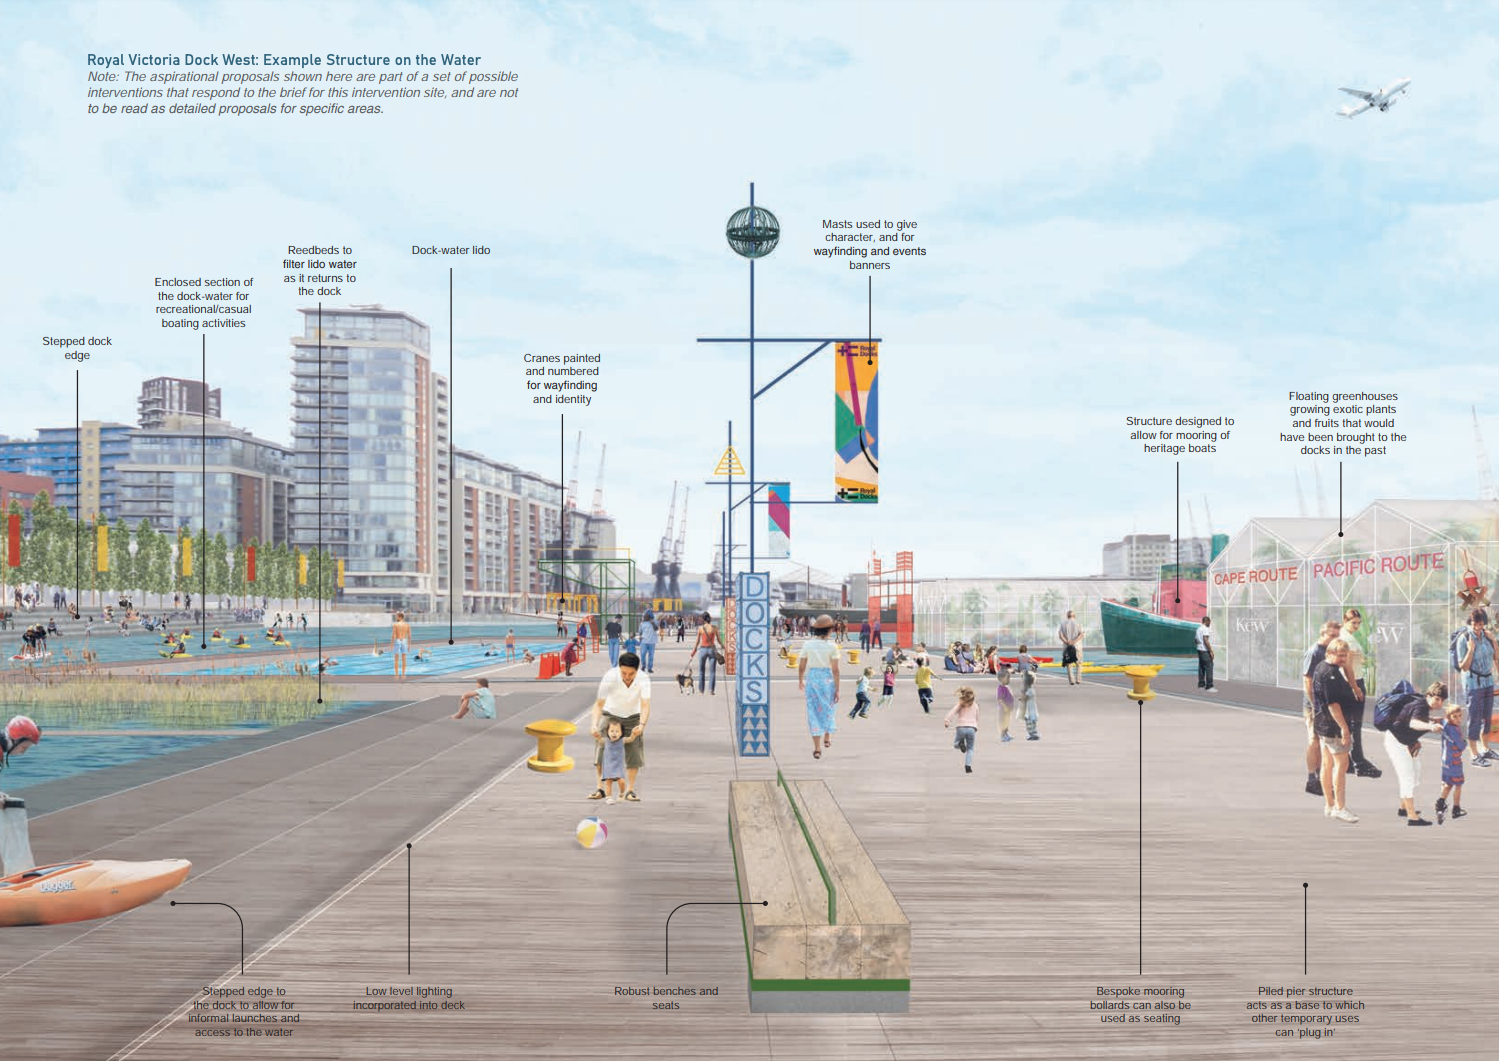 An image from the Royal Docks Public Realm Framework